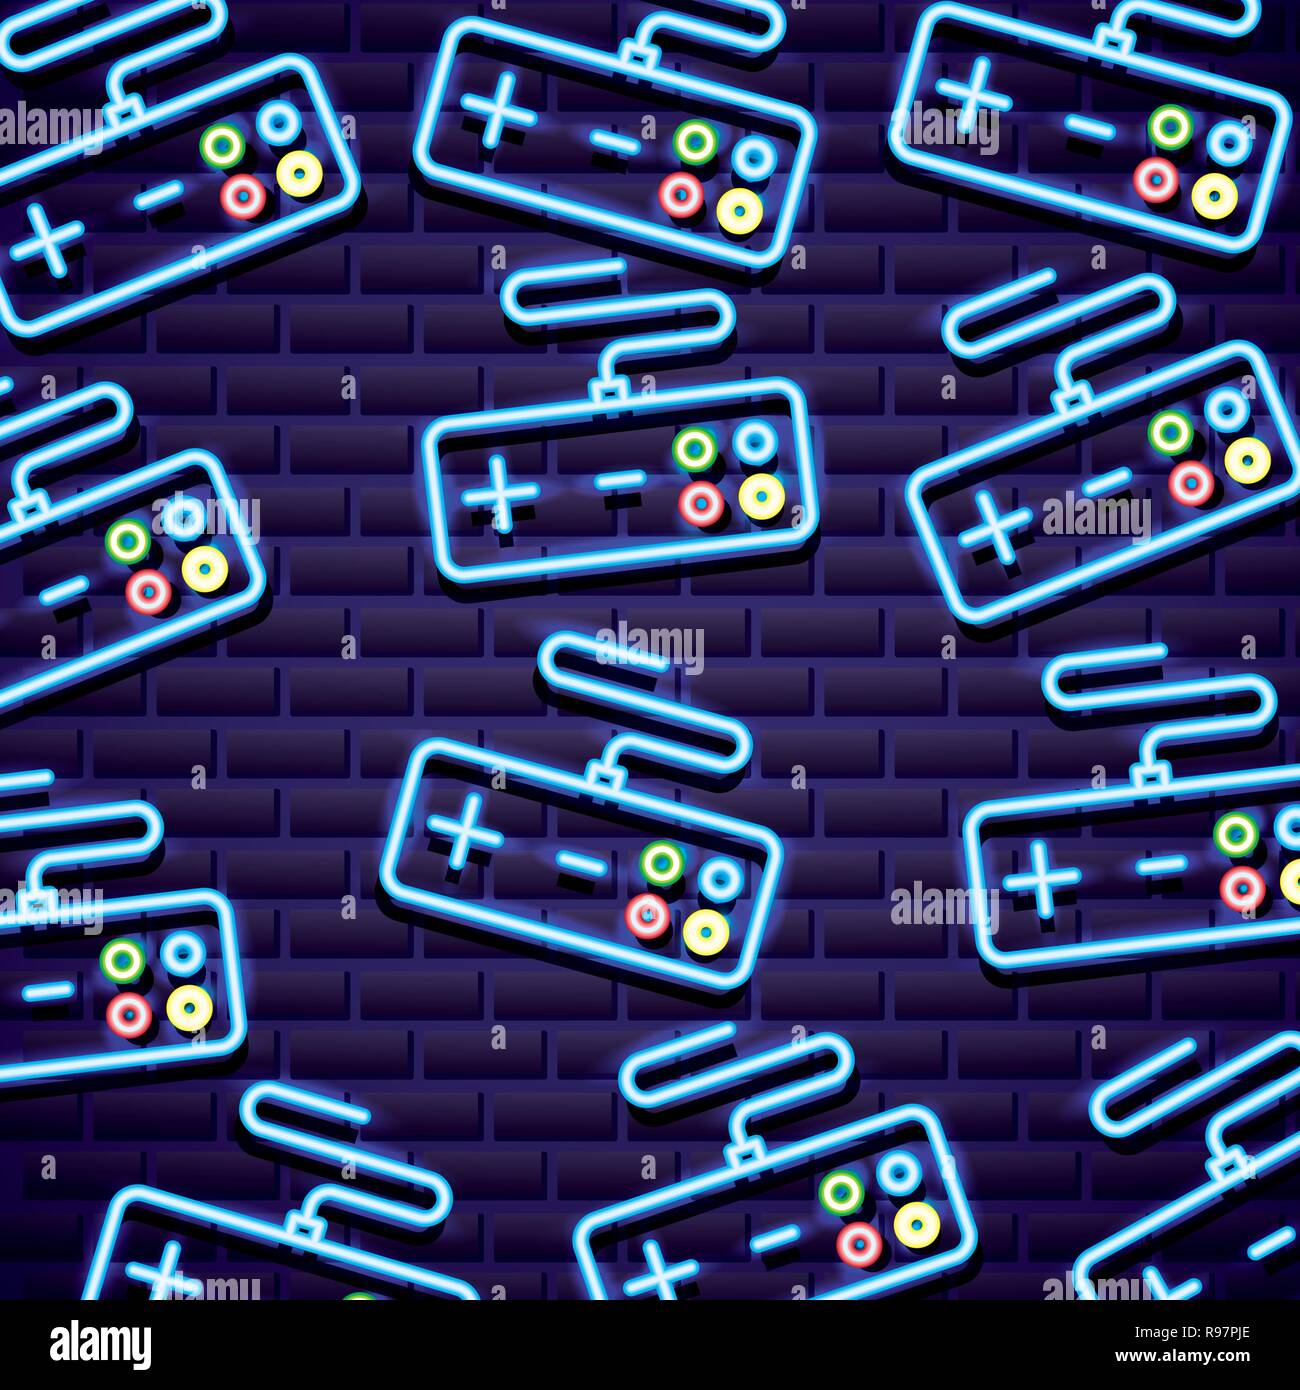 Video Games Controls Neon Background Vector Illustration Royalty Free SVG,  Cliparts, Vectors, And Stock Image